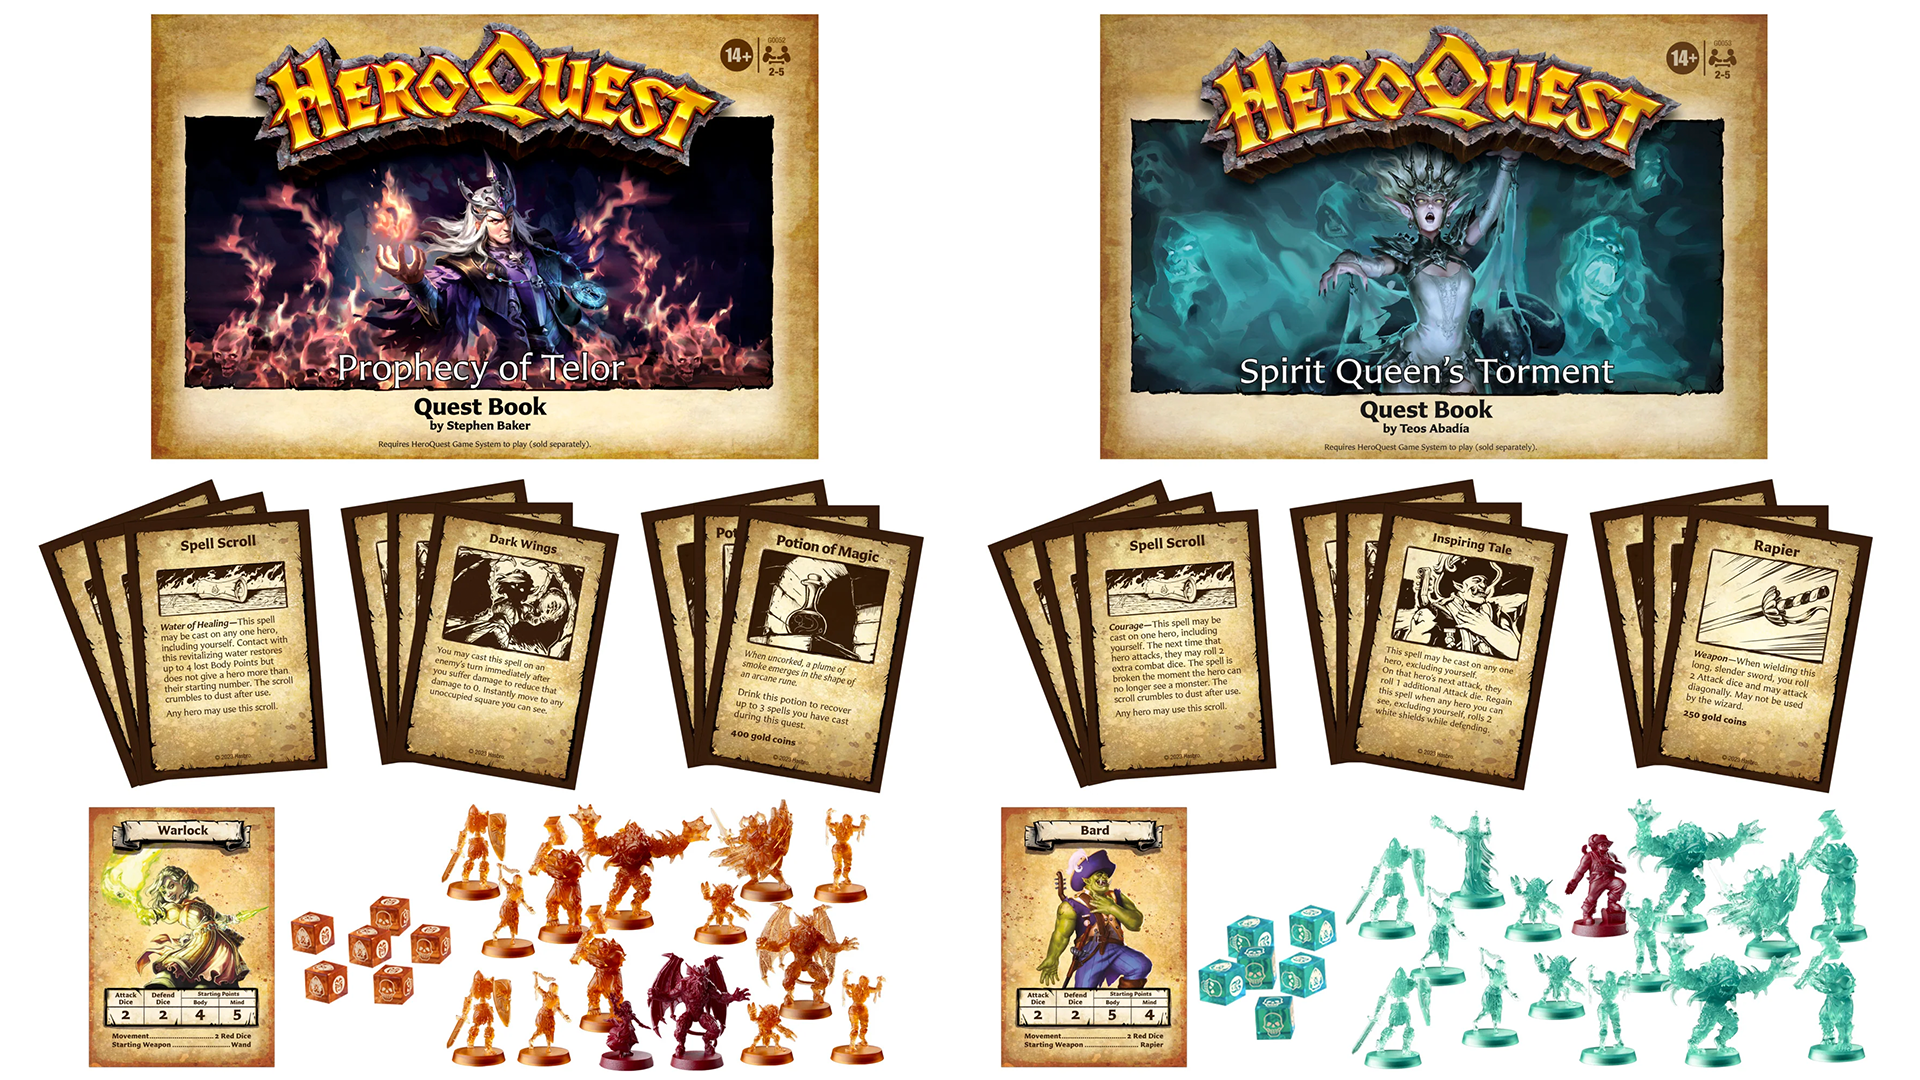 HeroQuest Mythic Quests (Mostly) Coming to Retail - Preorder Yours